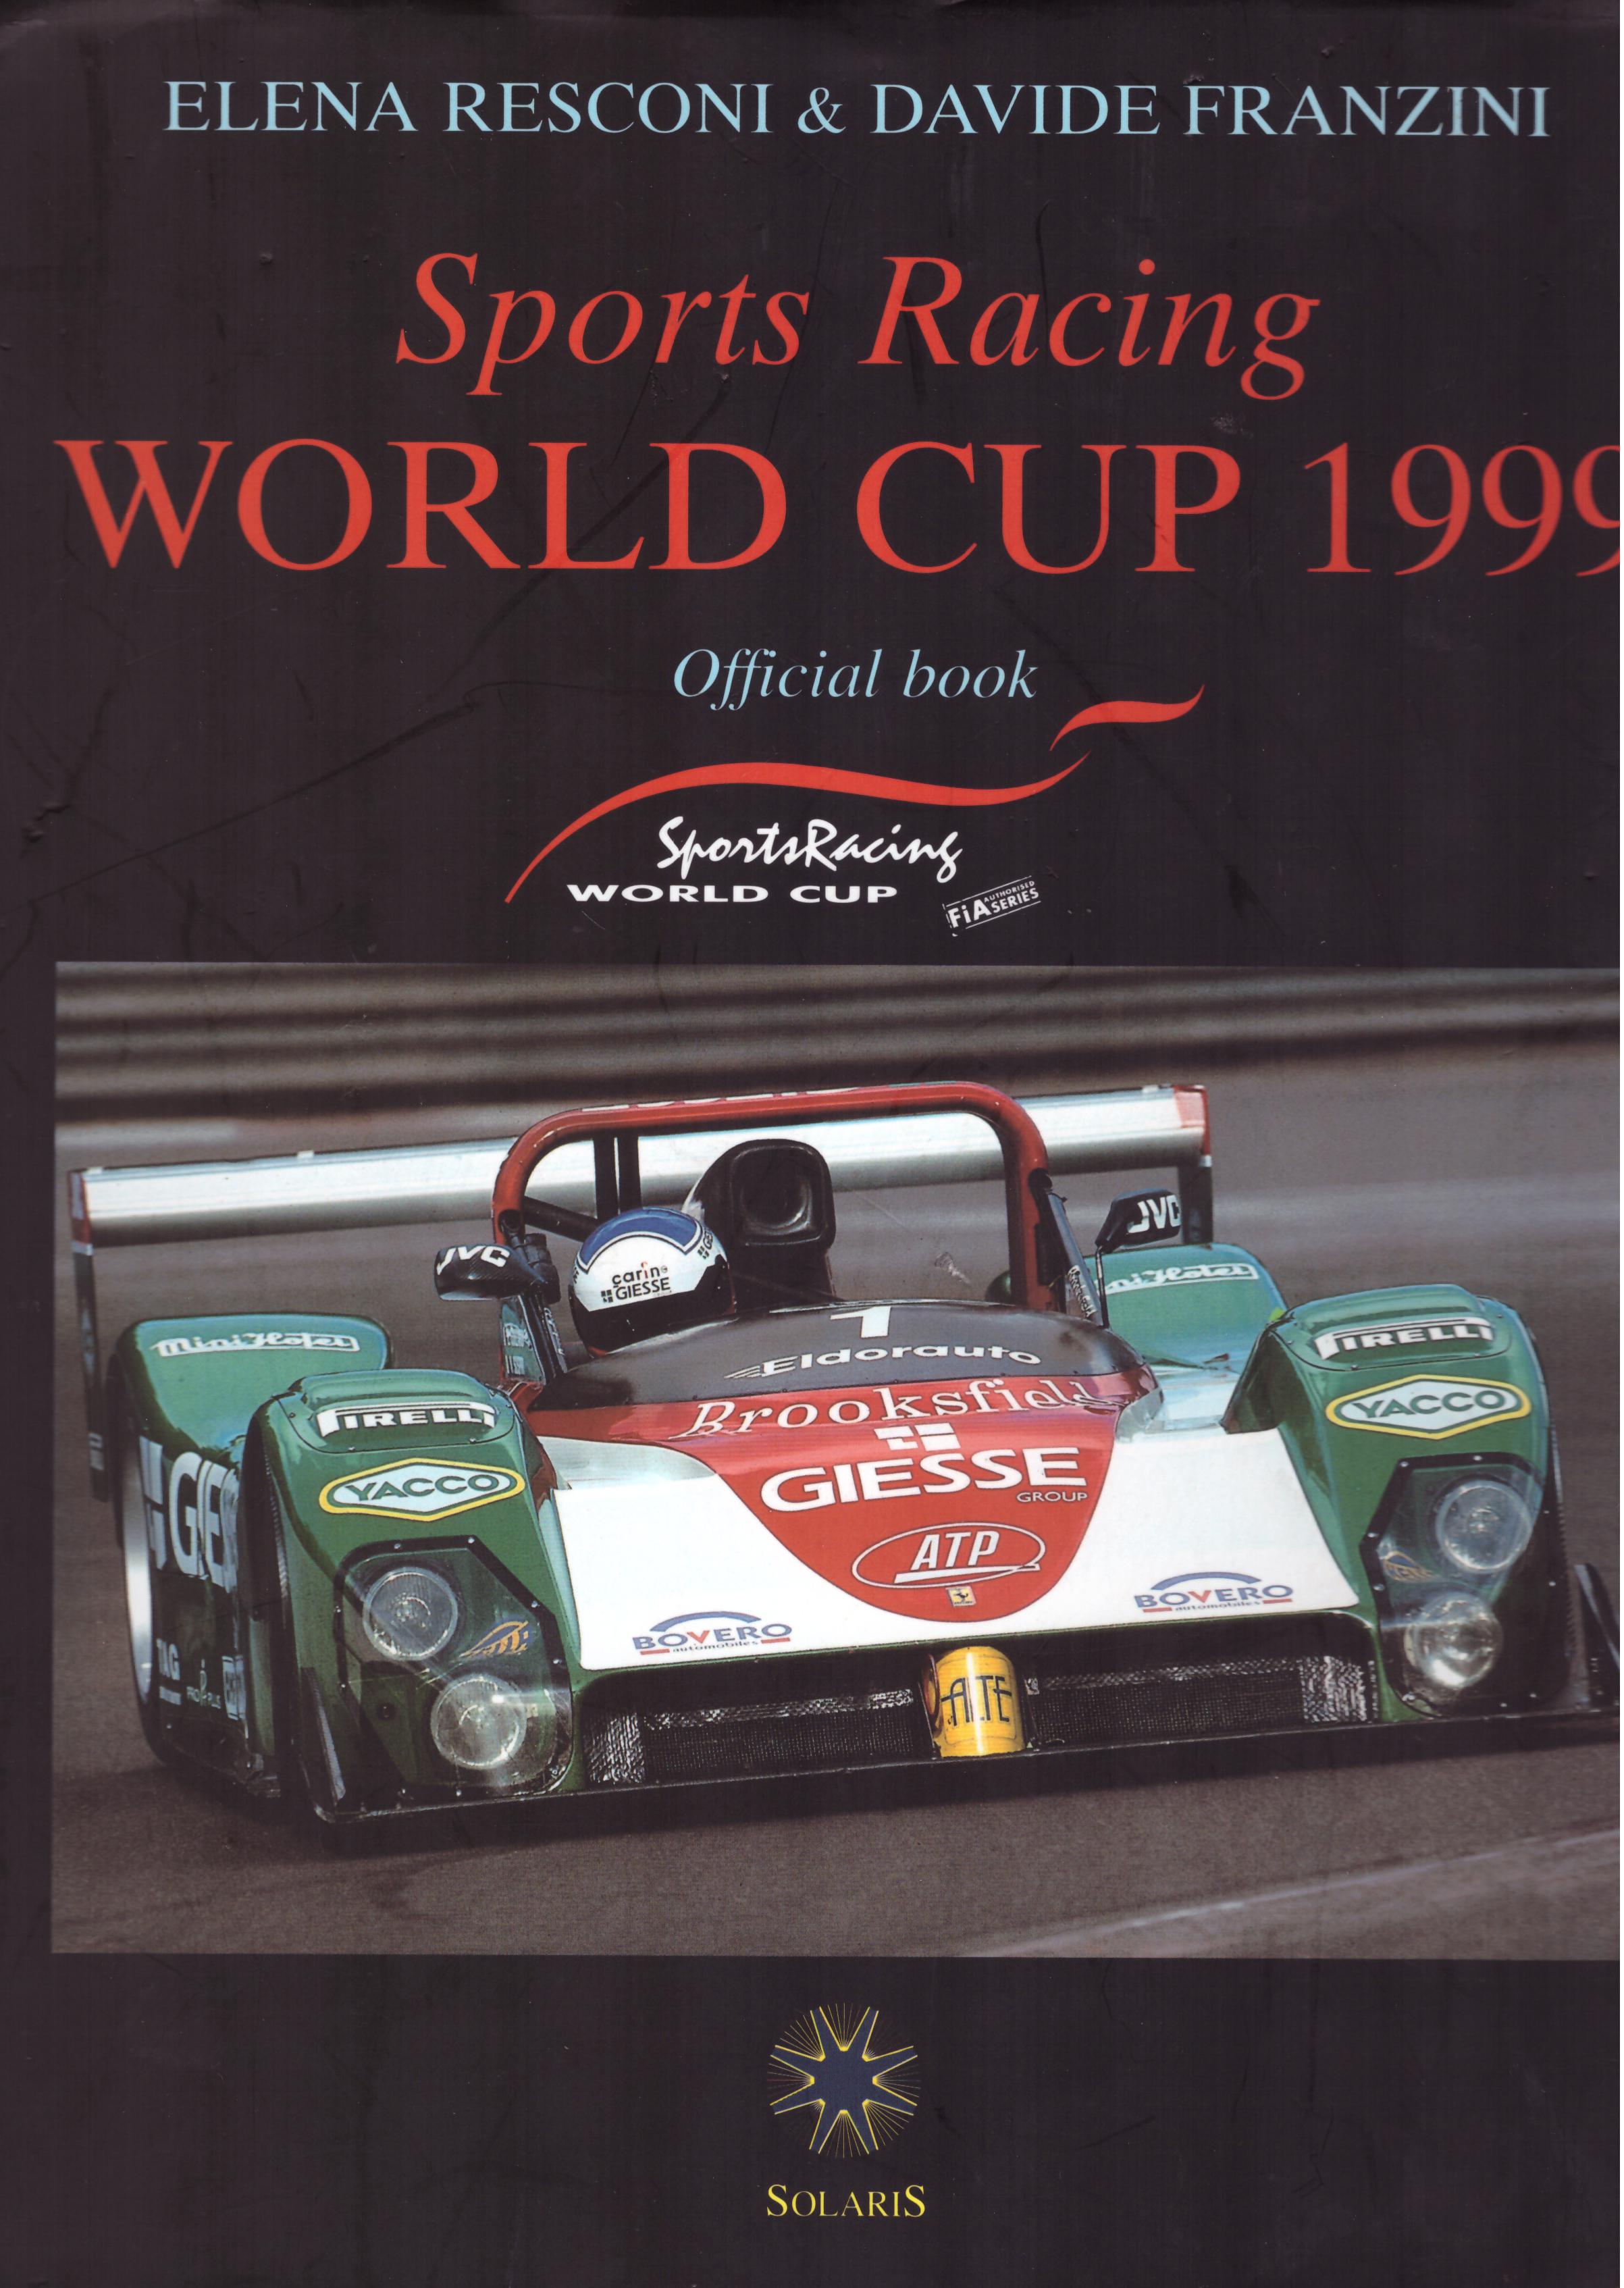 Sports Racing World Cup 1999